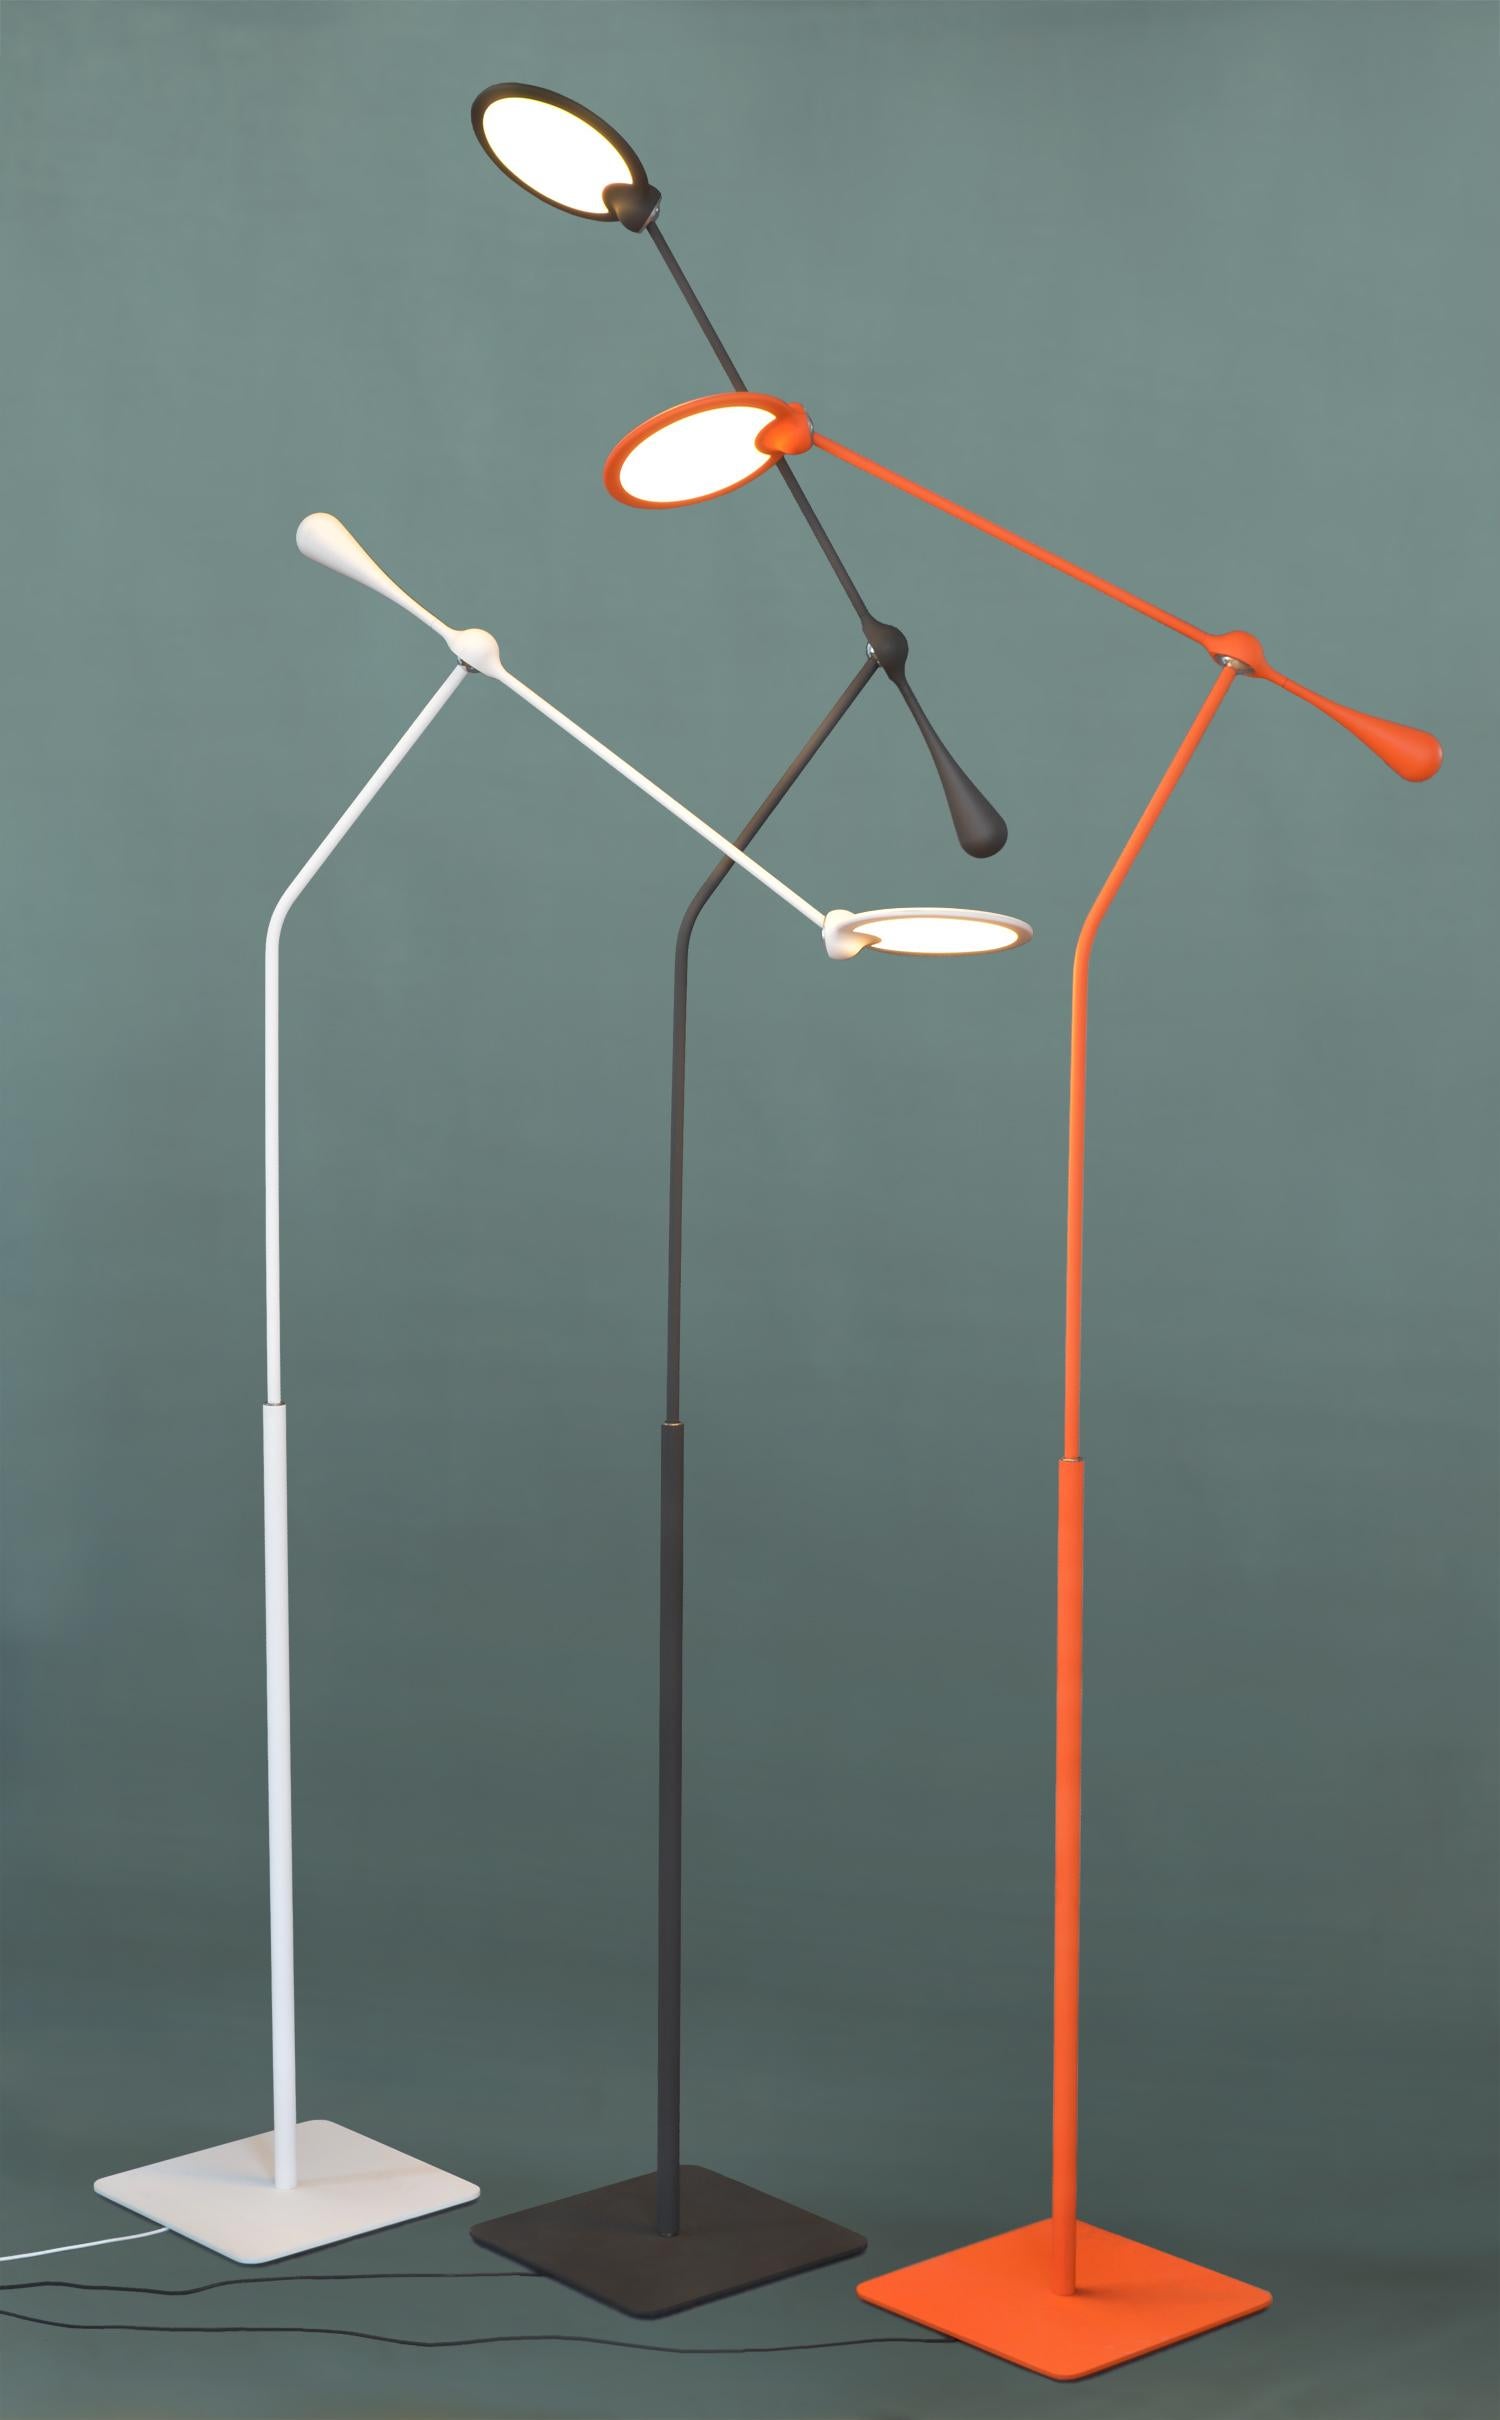 Aluminum, iron and steel structure, Dimmable 102 LED array, 18-380 lumens

Peter Stathis, LED light designer based in San Francisco envisioned the Trapeze lamp as an ultra-functional, long-lasting energy efficient task light with personality.

As